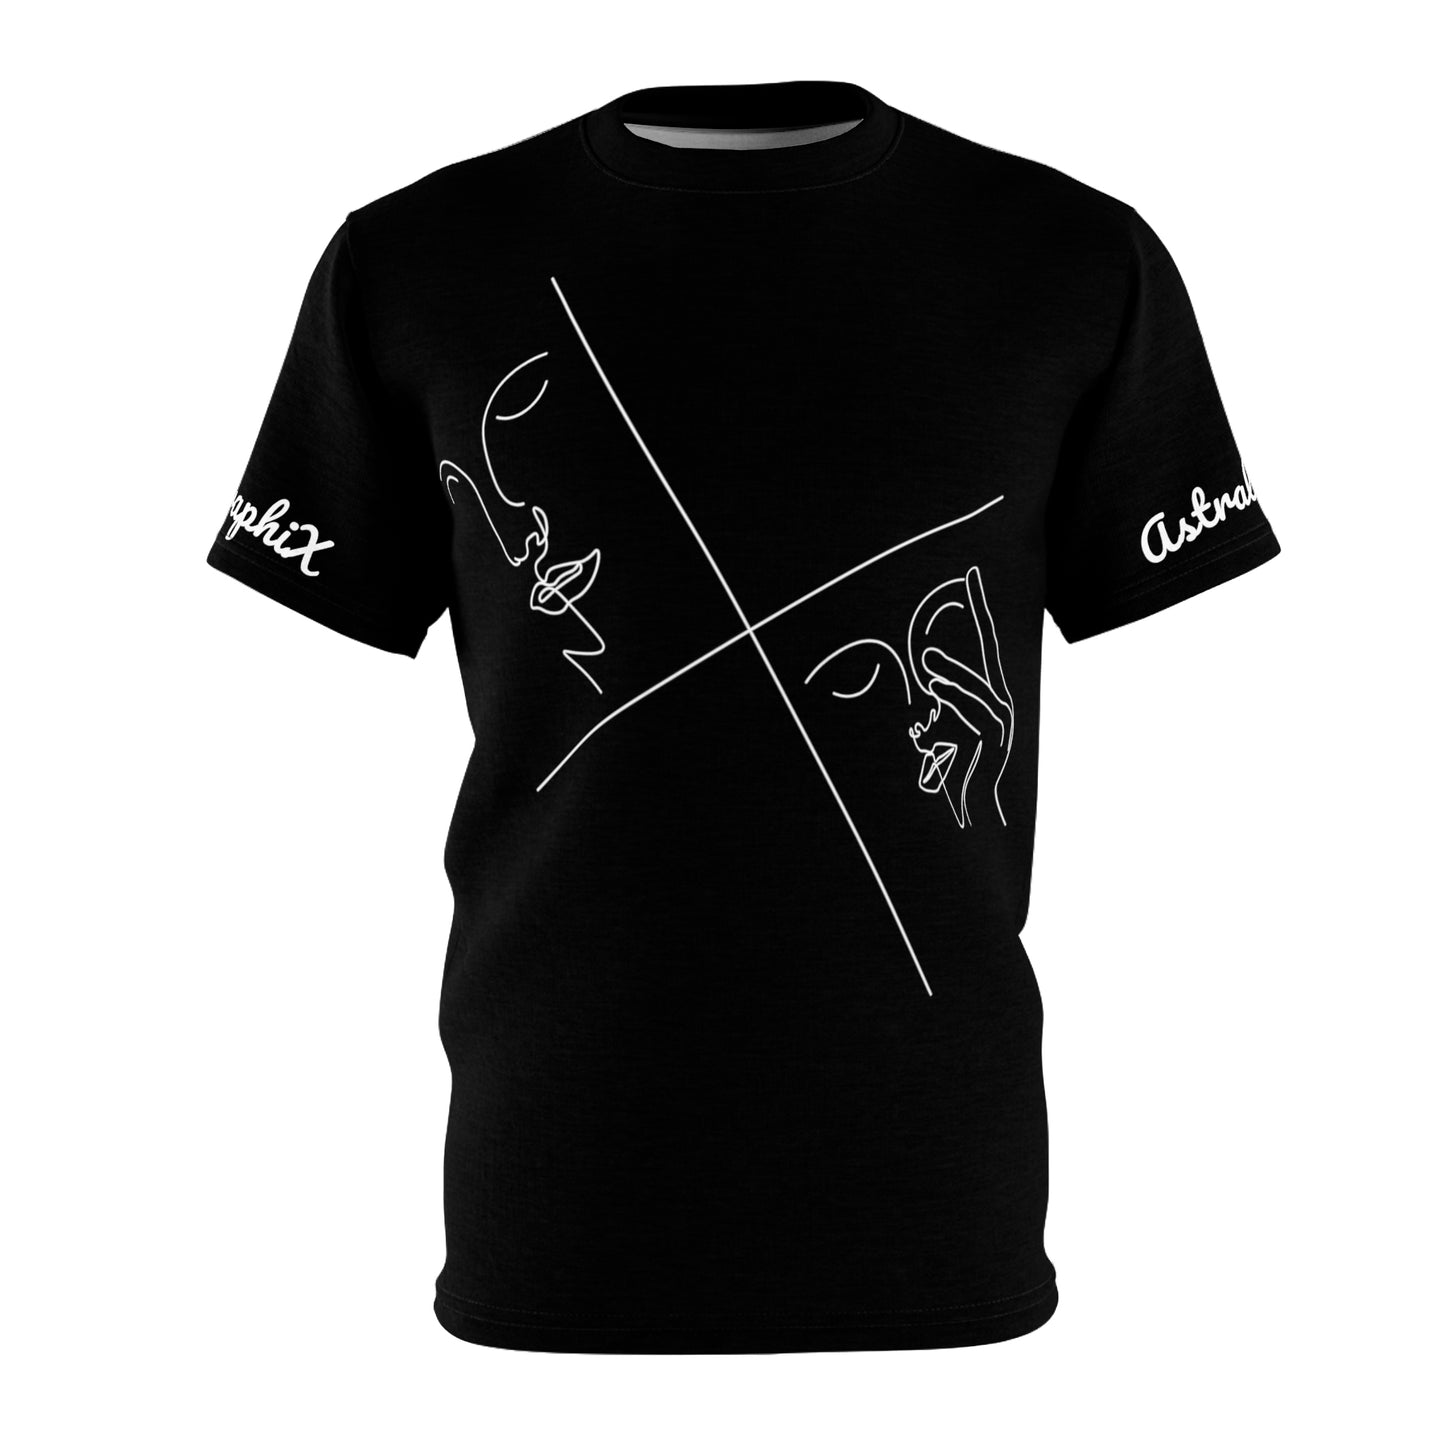 Art Work Collection - Unisex AOP Cut & Sew Tee - Lined Face in Black